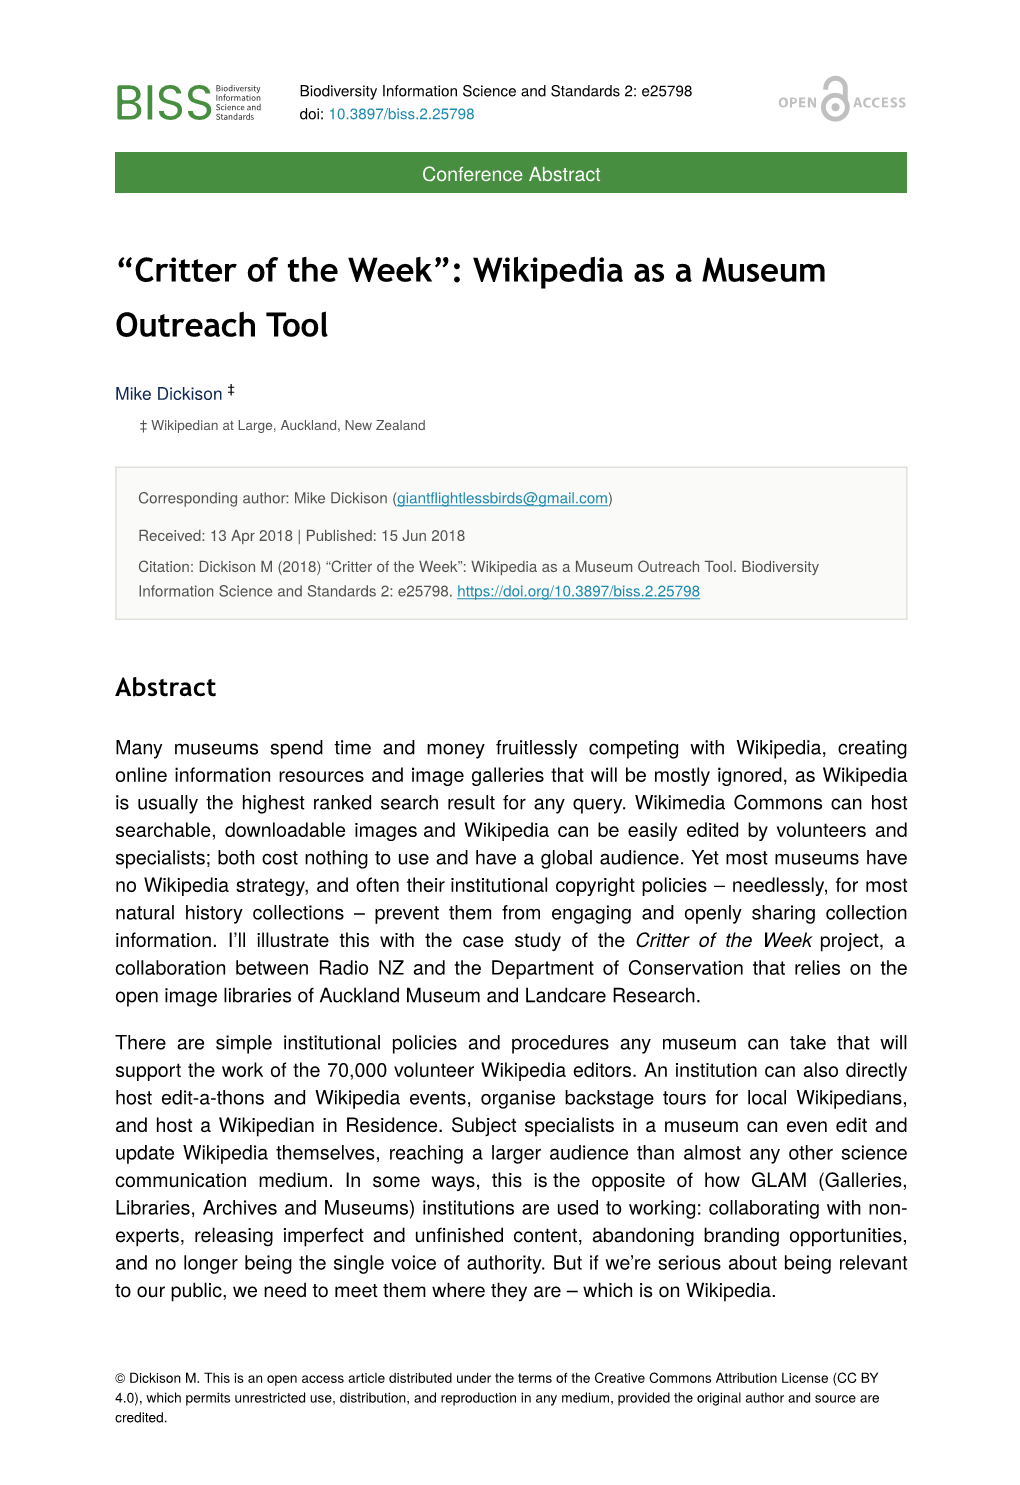 “Critter of the Week”: Wikipedia As a Museum Outreach Tool